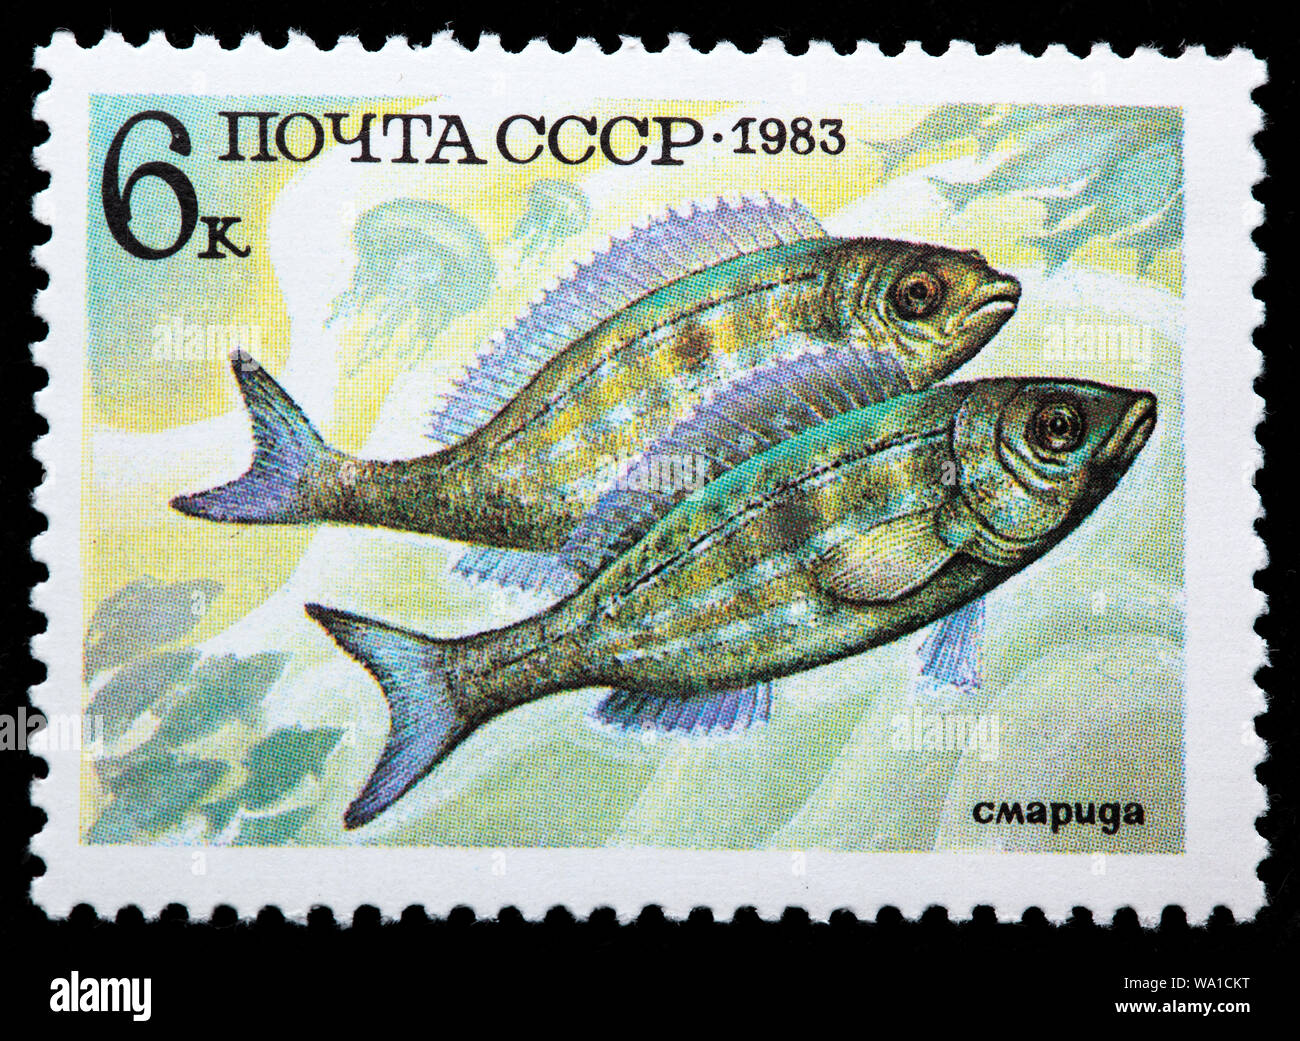 Picarel, Spicara, fish, postage stamp, Russia, USSR, 1983 Stock Photo